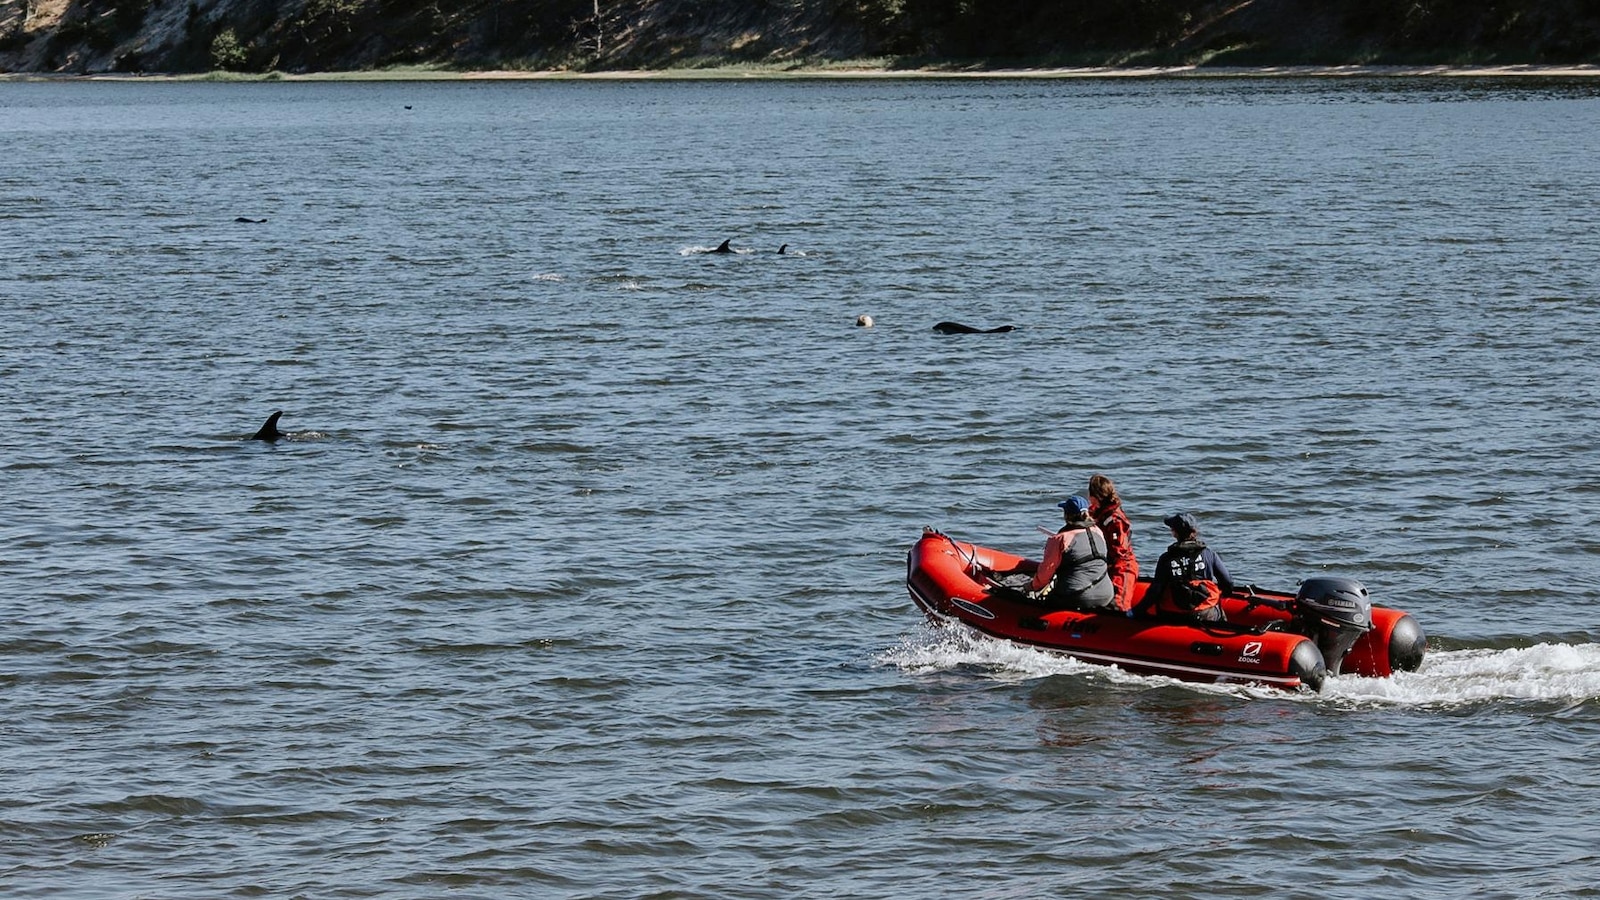 Animal rescuers save more than 100 dolphins during mass stranding event around Cape Cod